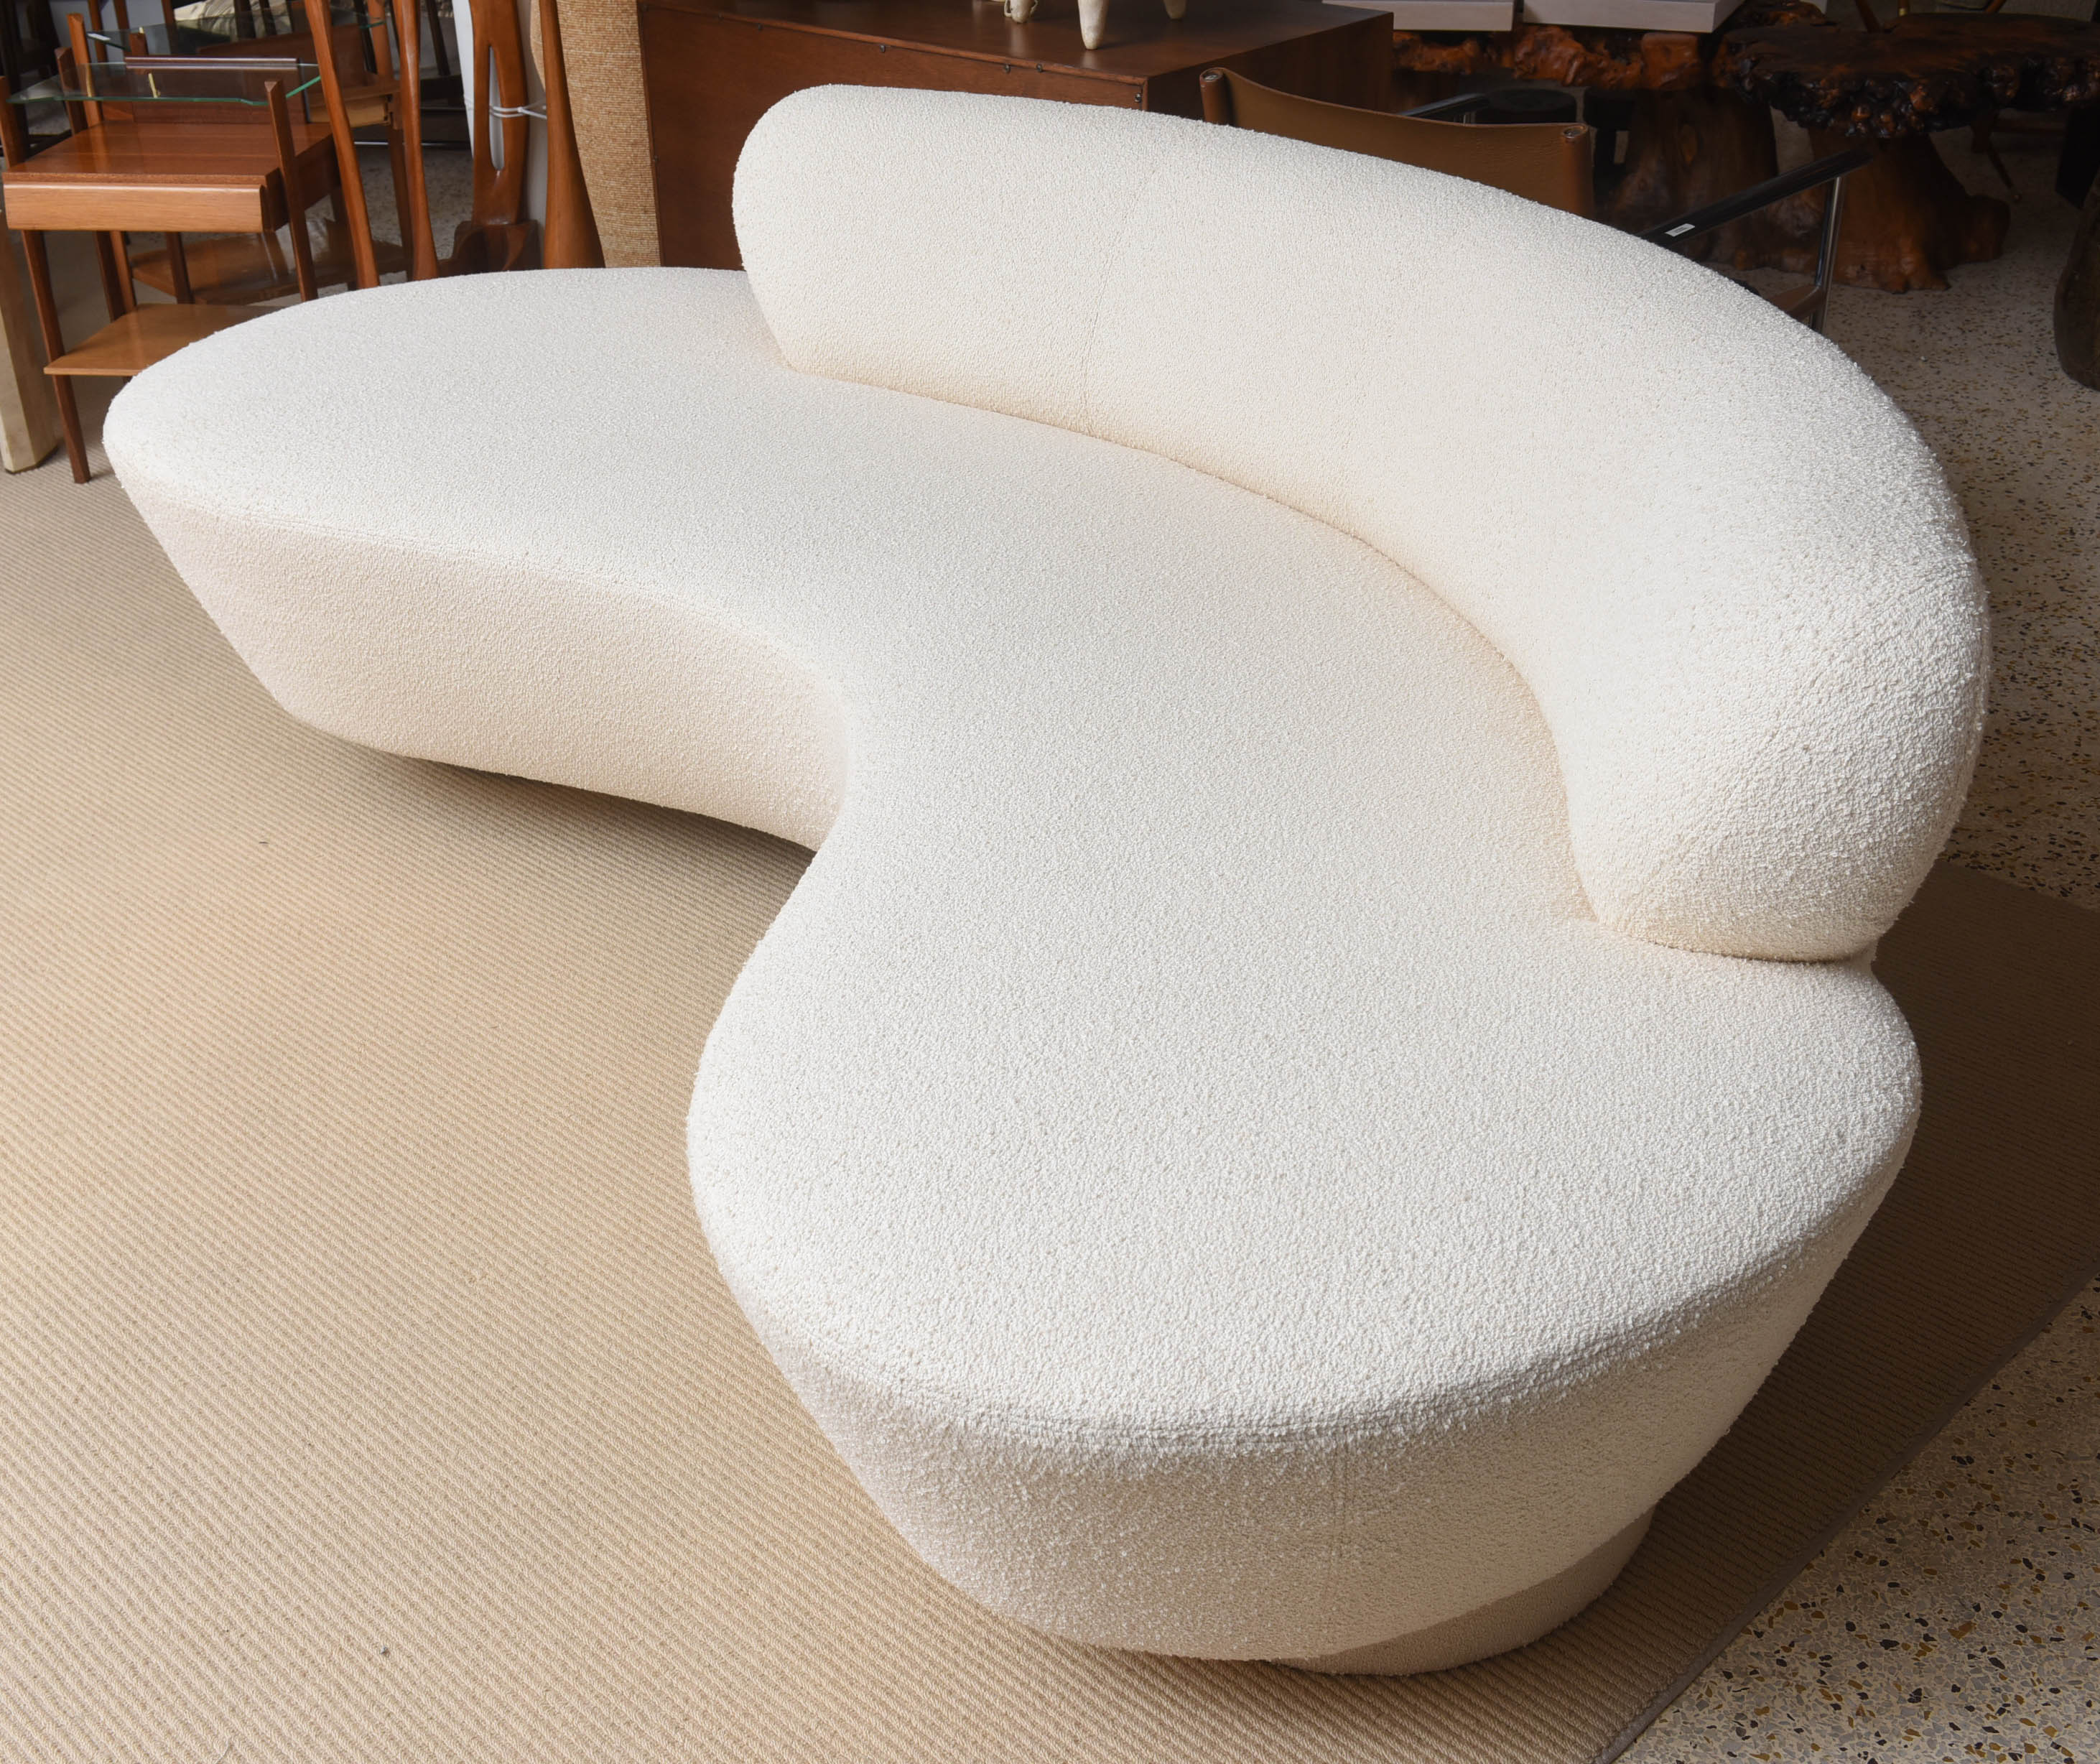 Late 20th Century Cloud Sofa by Vladimir Kagan for Directional